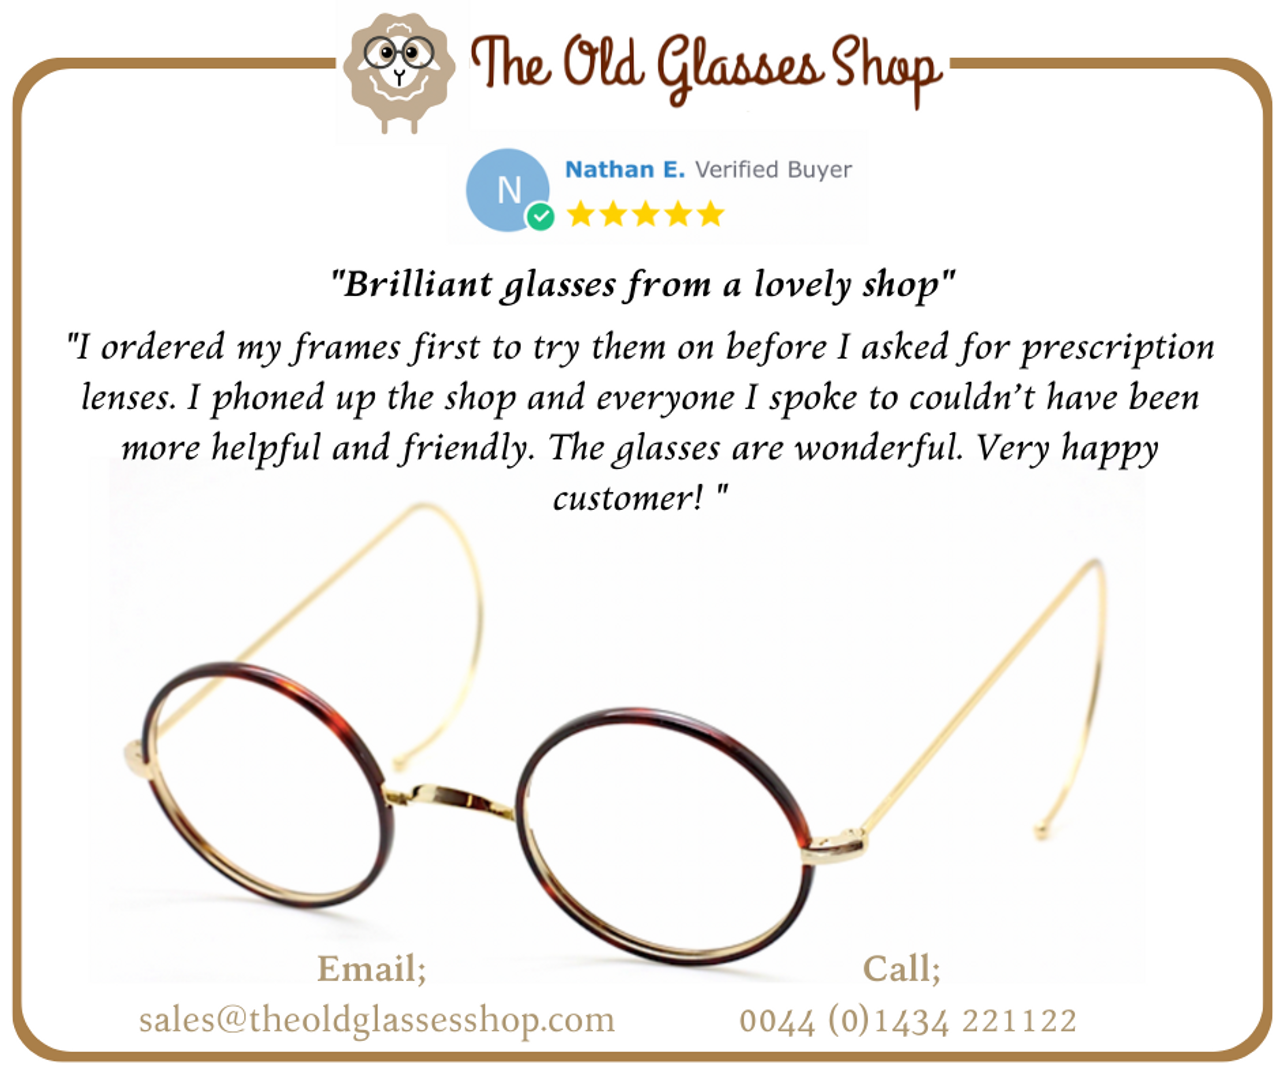 True Round NHS Style Spectacles By Beuren Saddle Bridge And Curlsides With Chestnut Rims 40mm / 42mm